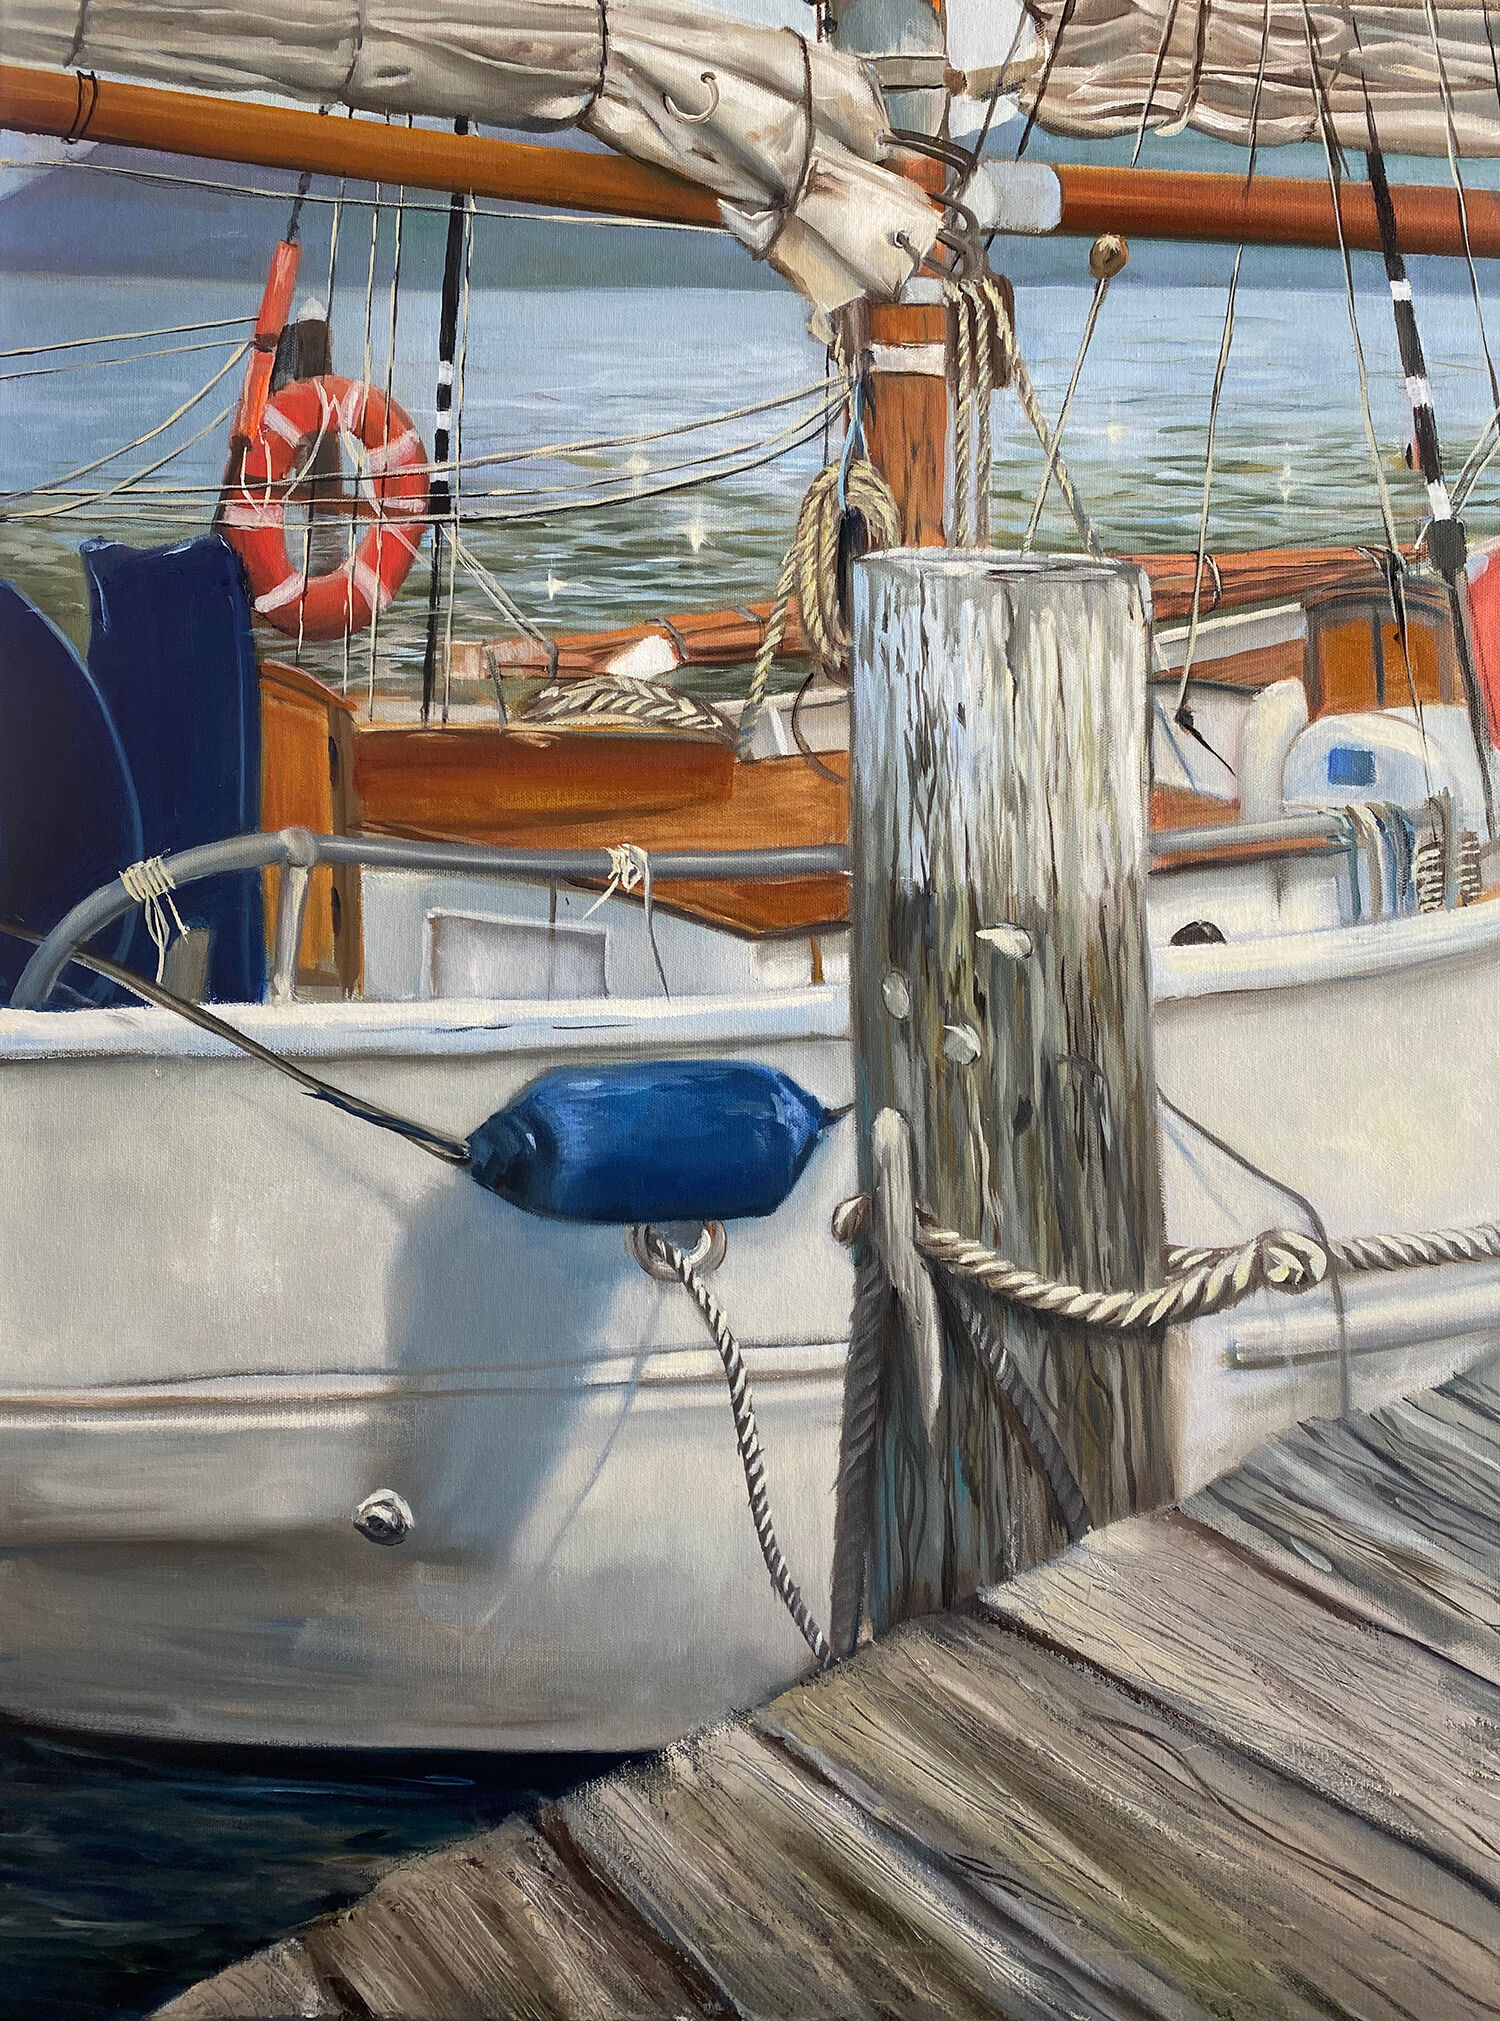 Picture "Sailing boat in Flensburg harbor - work no. 200901" (2020)